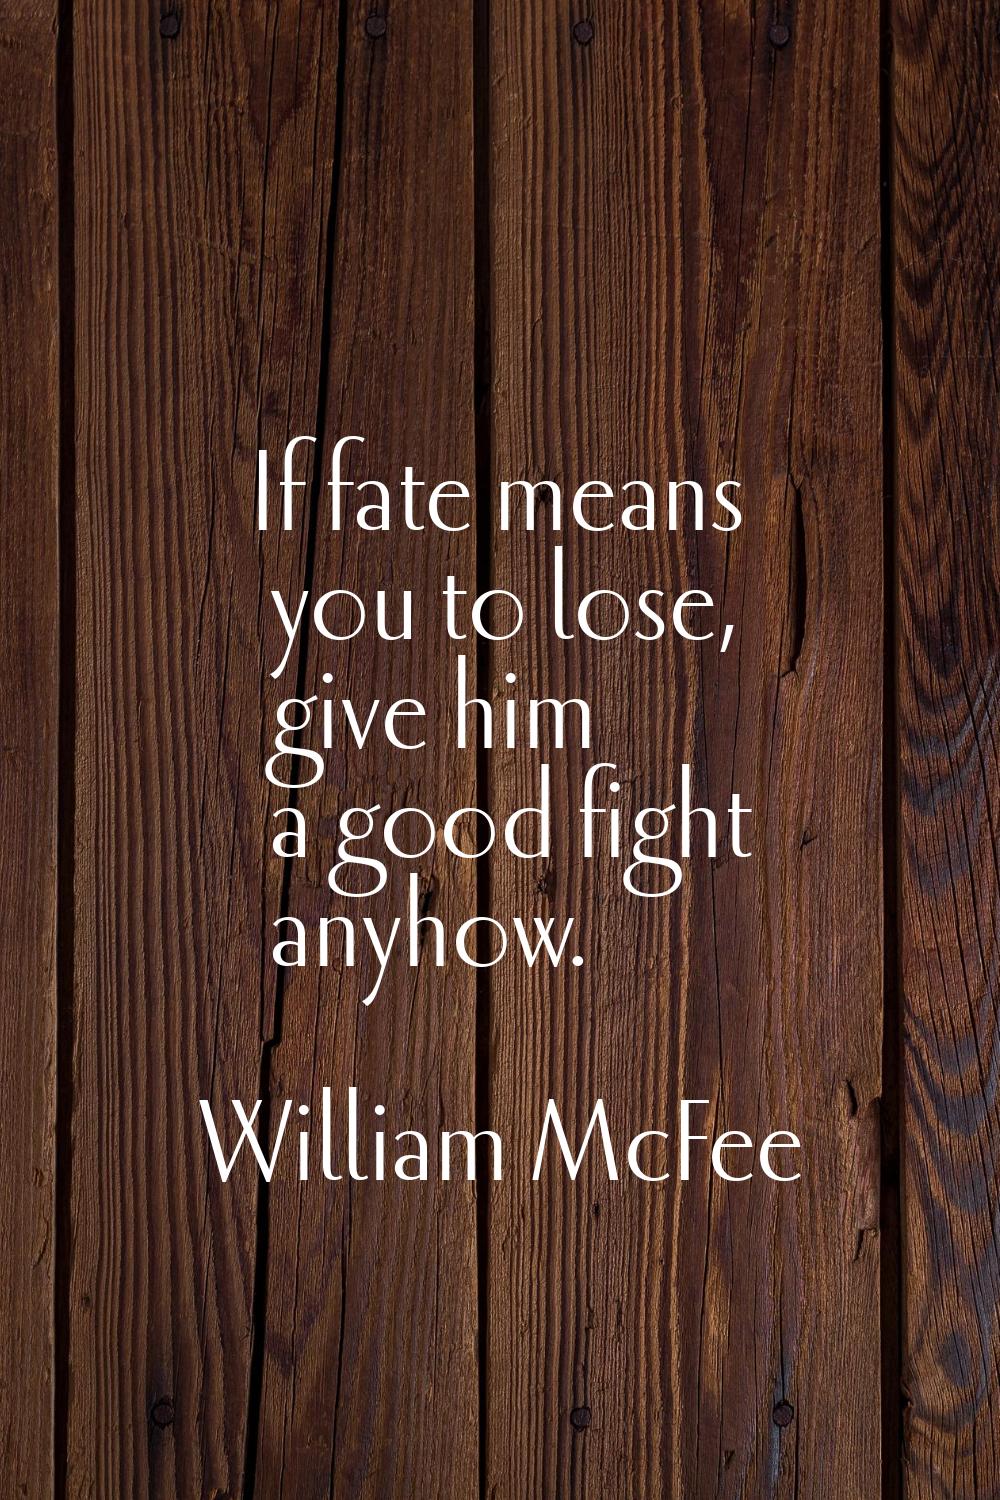 If fate means you to lose, give him a good fight anyhow.